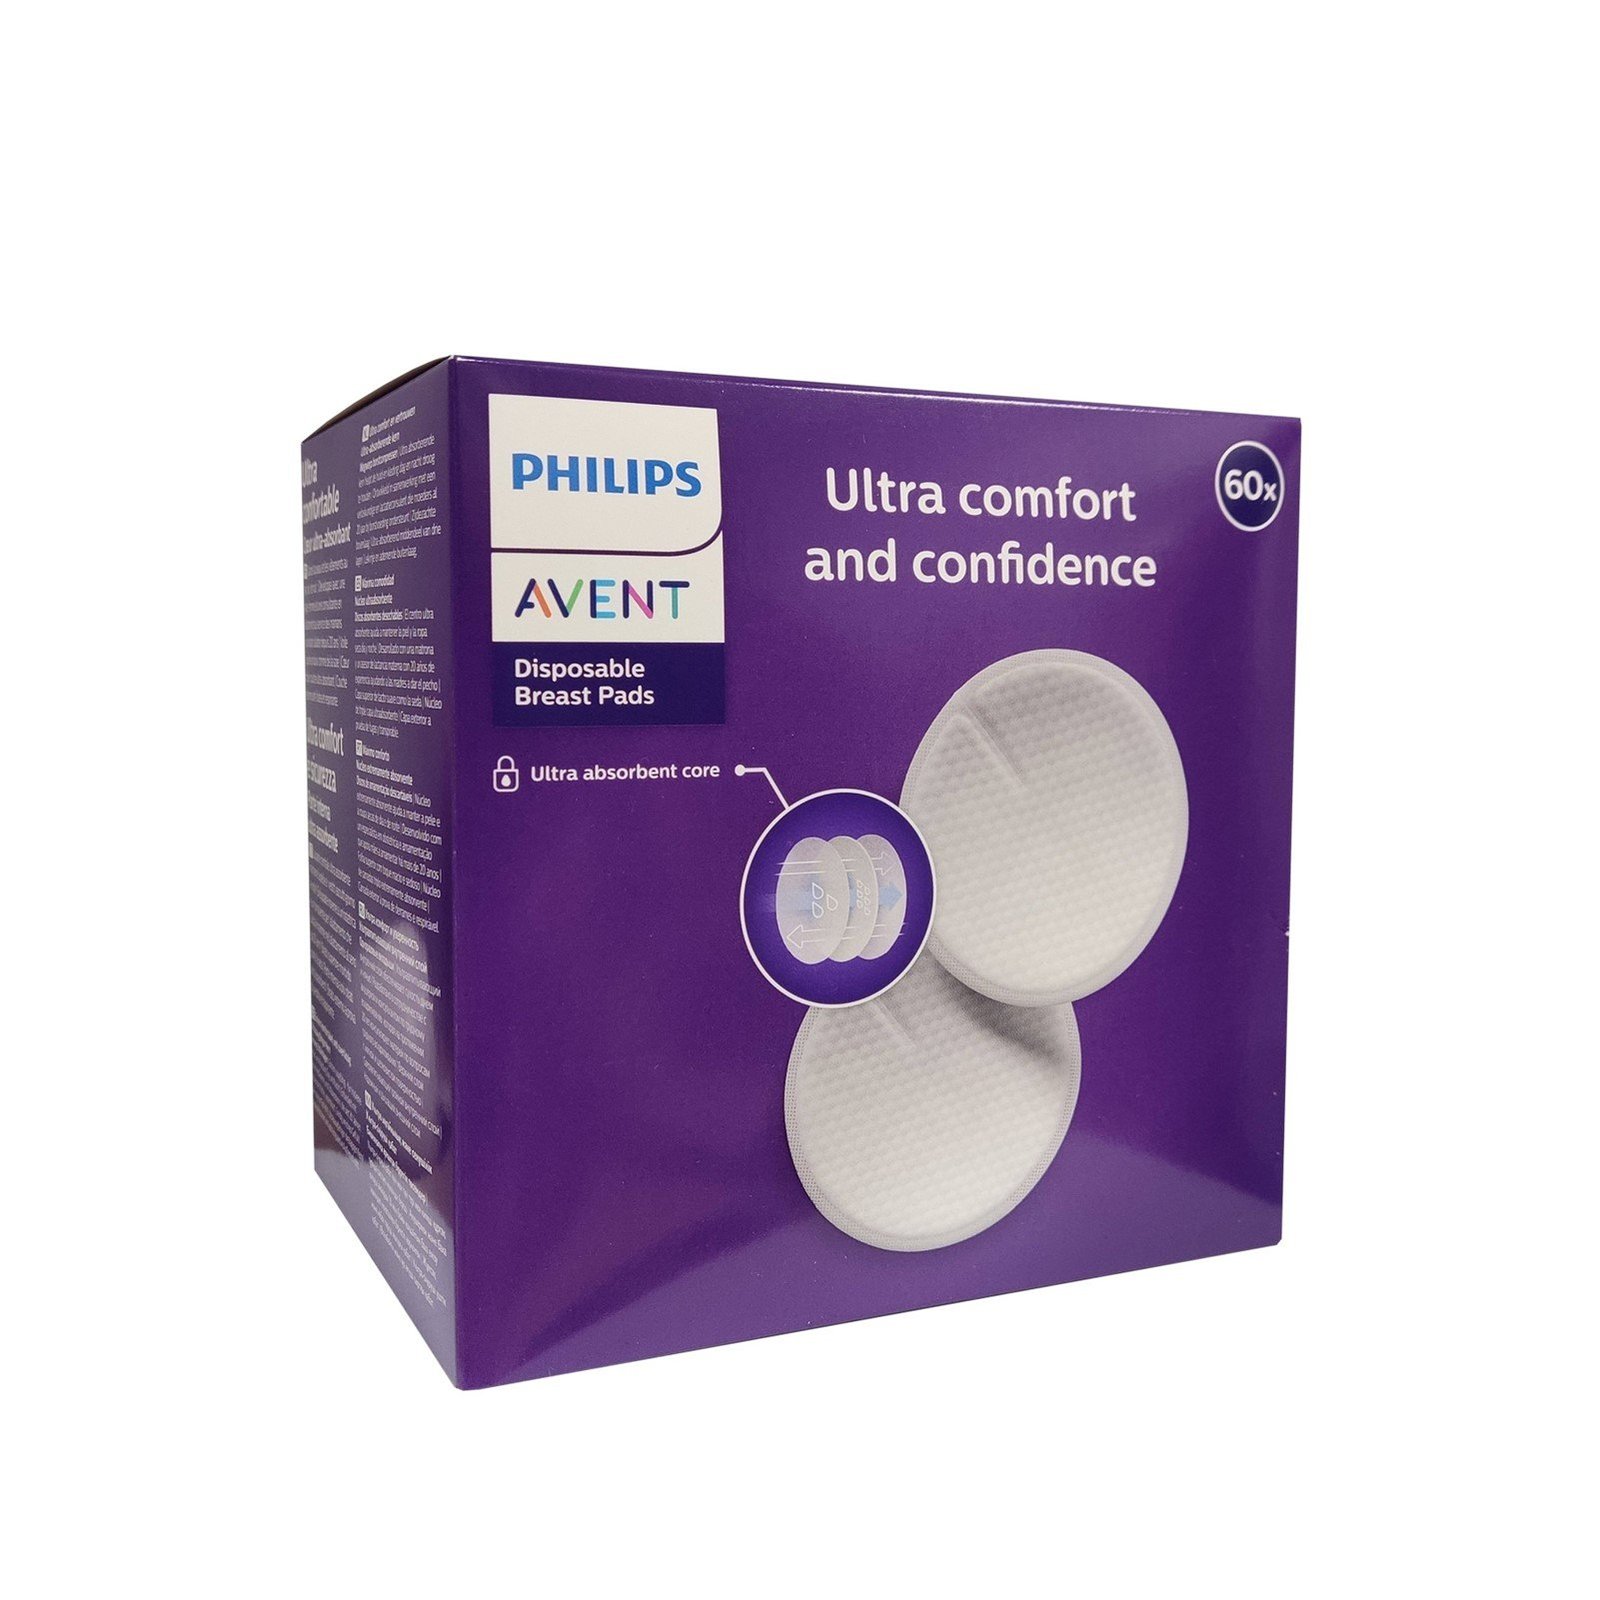 Comprar Philips Avent Disposable Breast Pads x60 · Mozambique